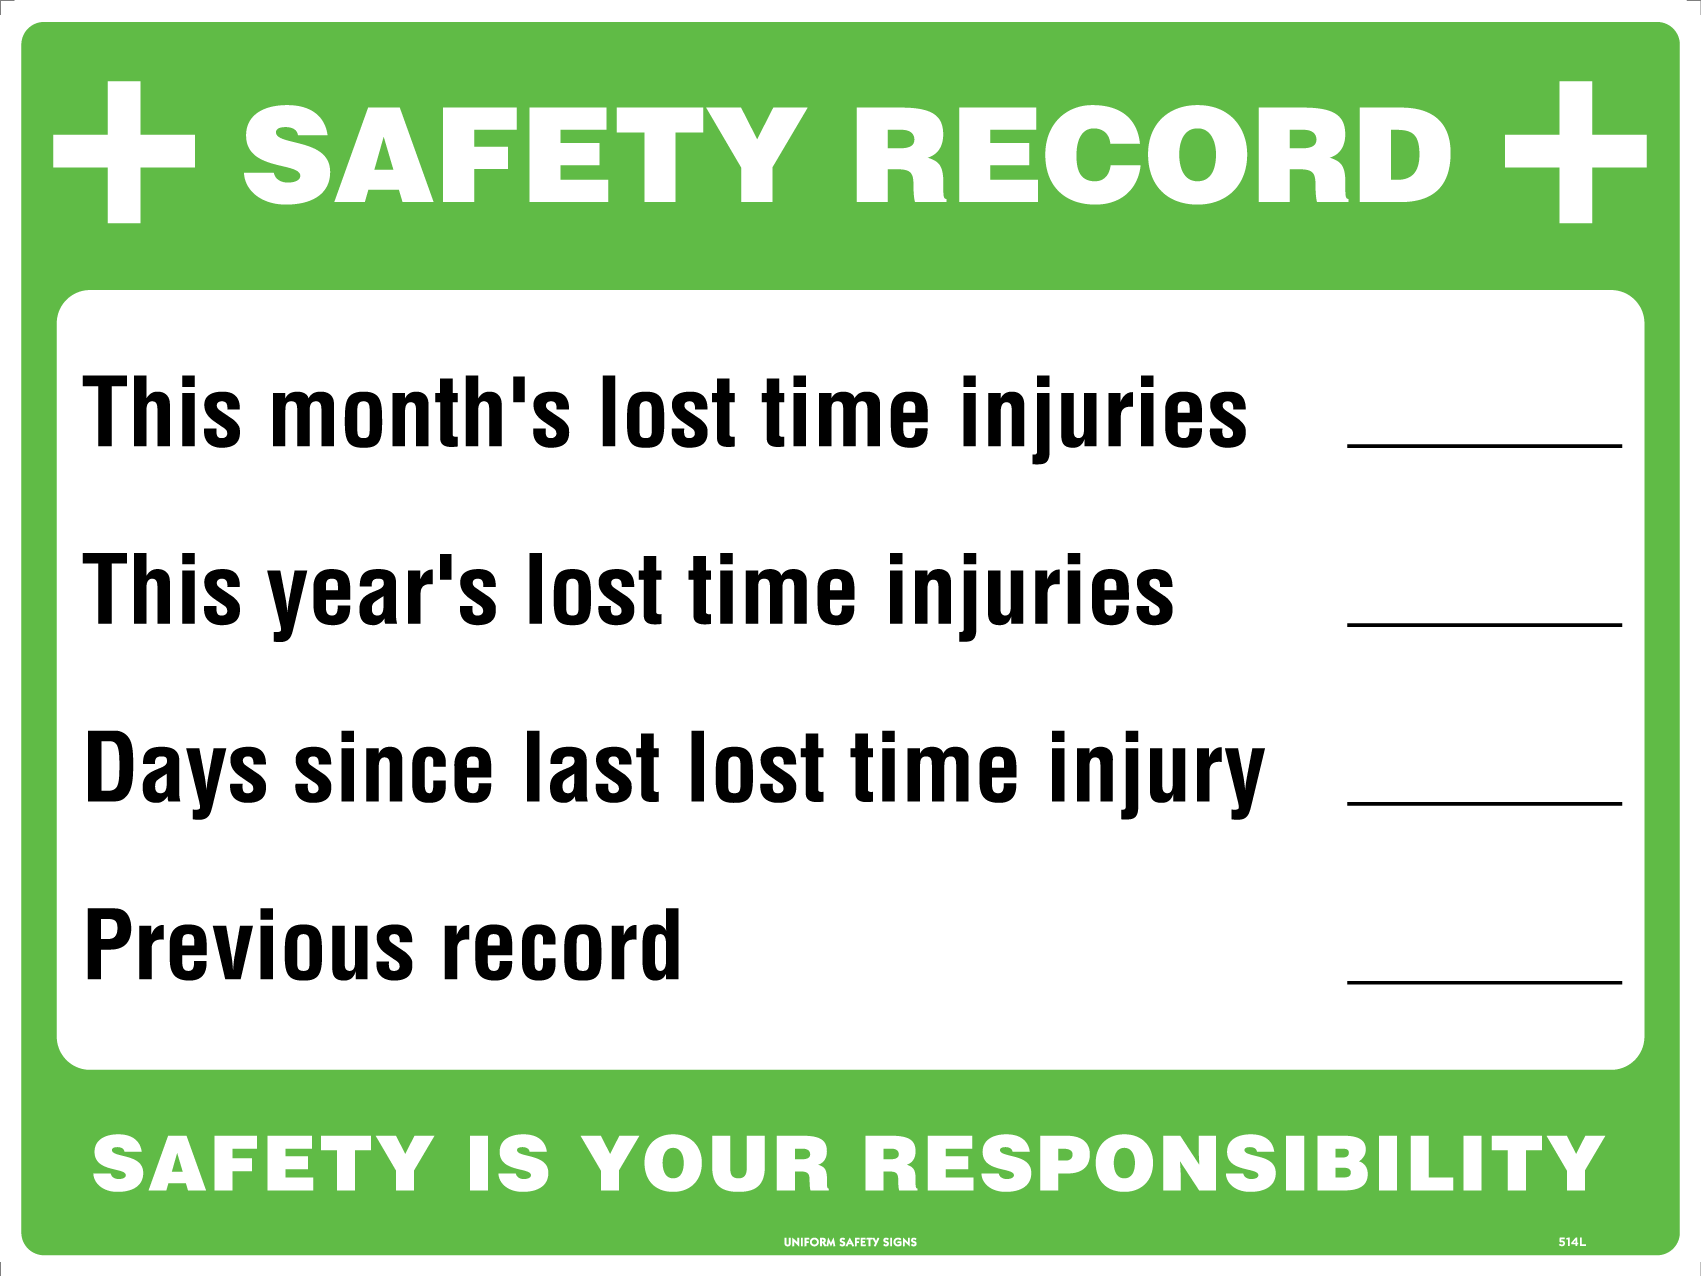 UNIFORM SAFETY 900X600MM METAL SAFETY RECORD BOARD 